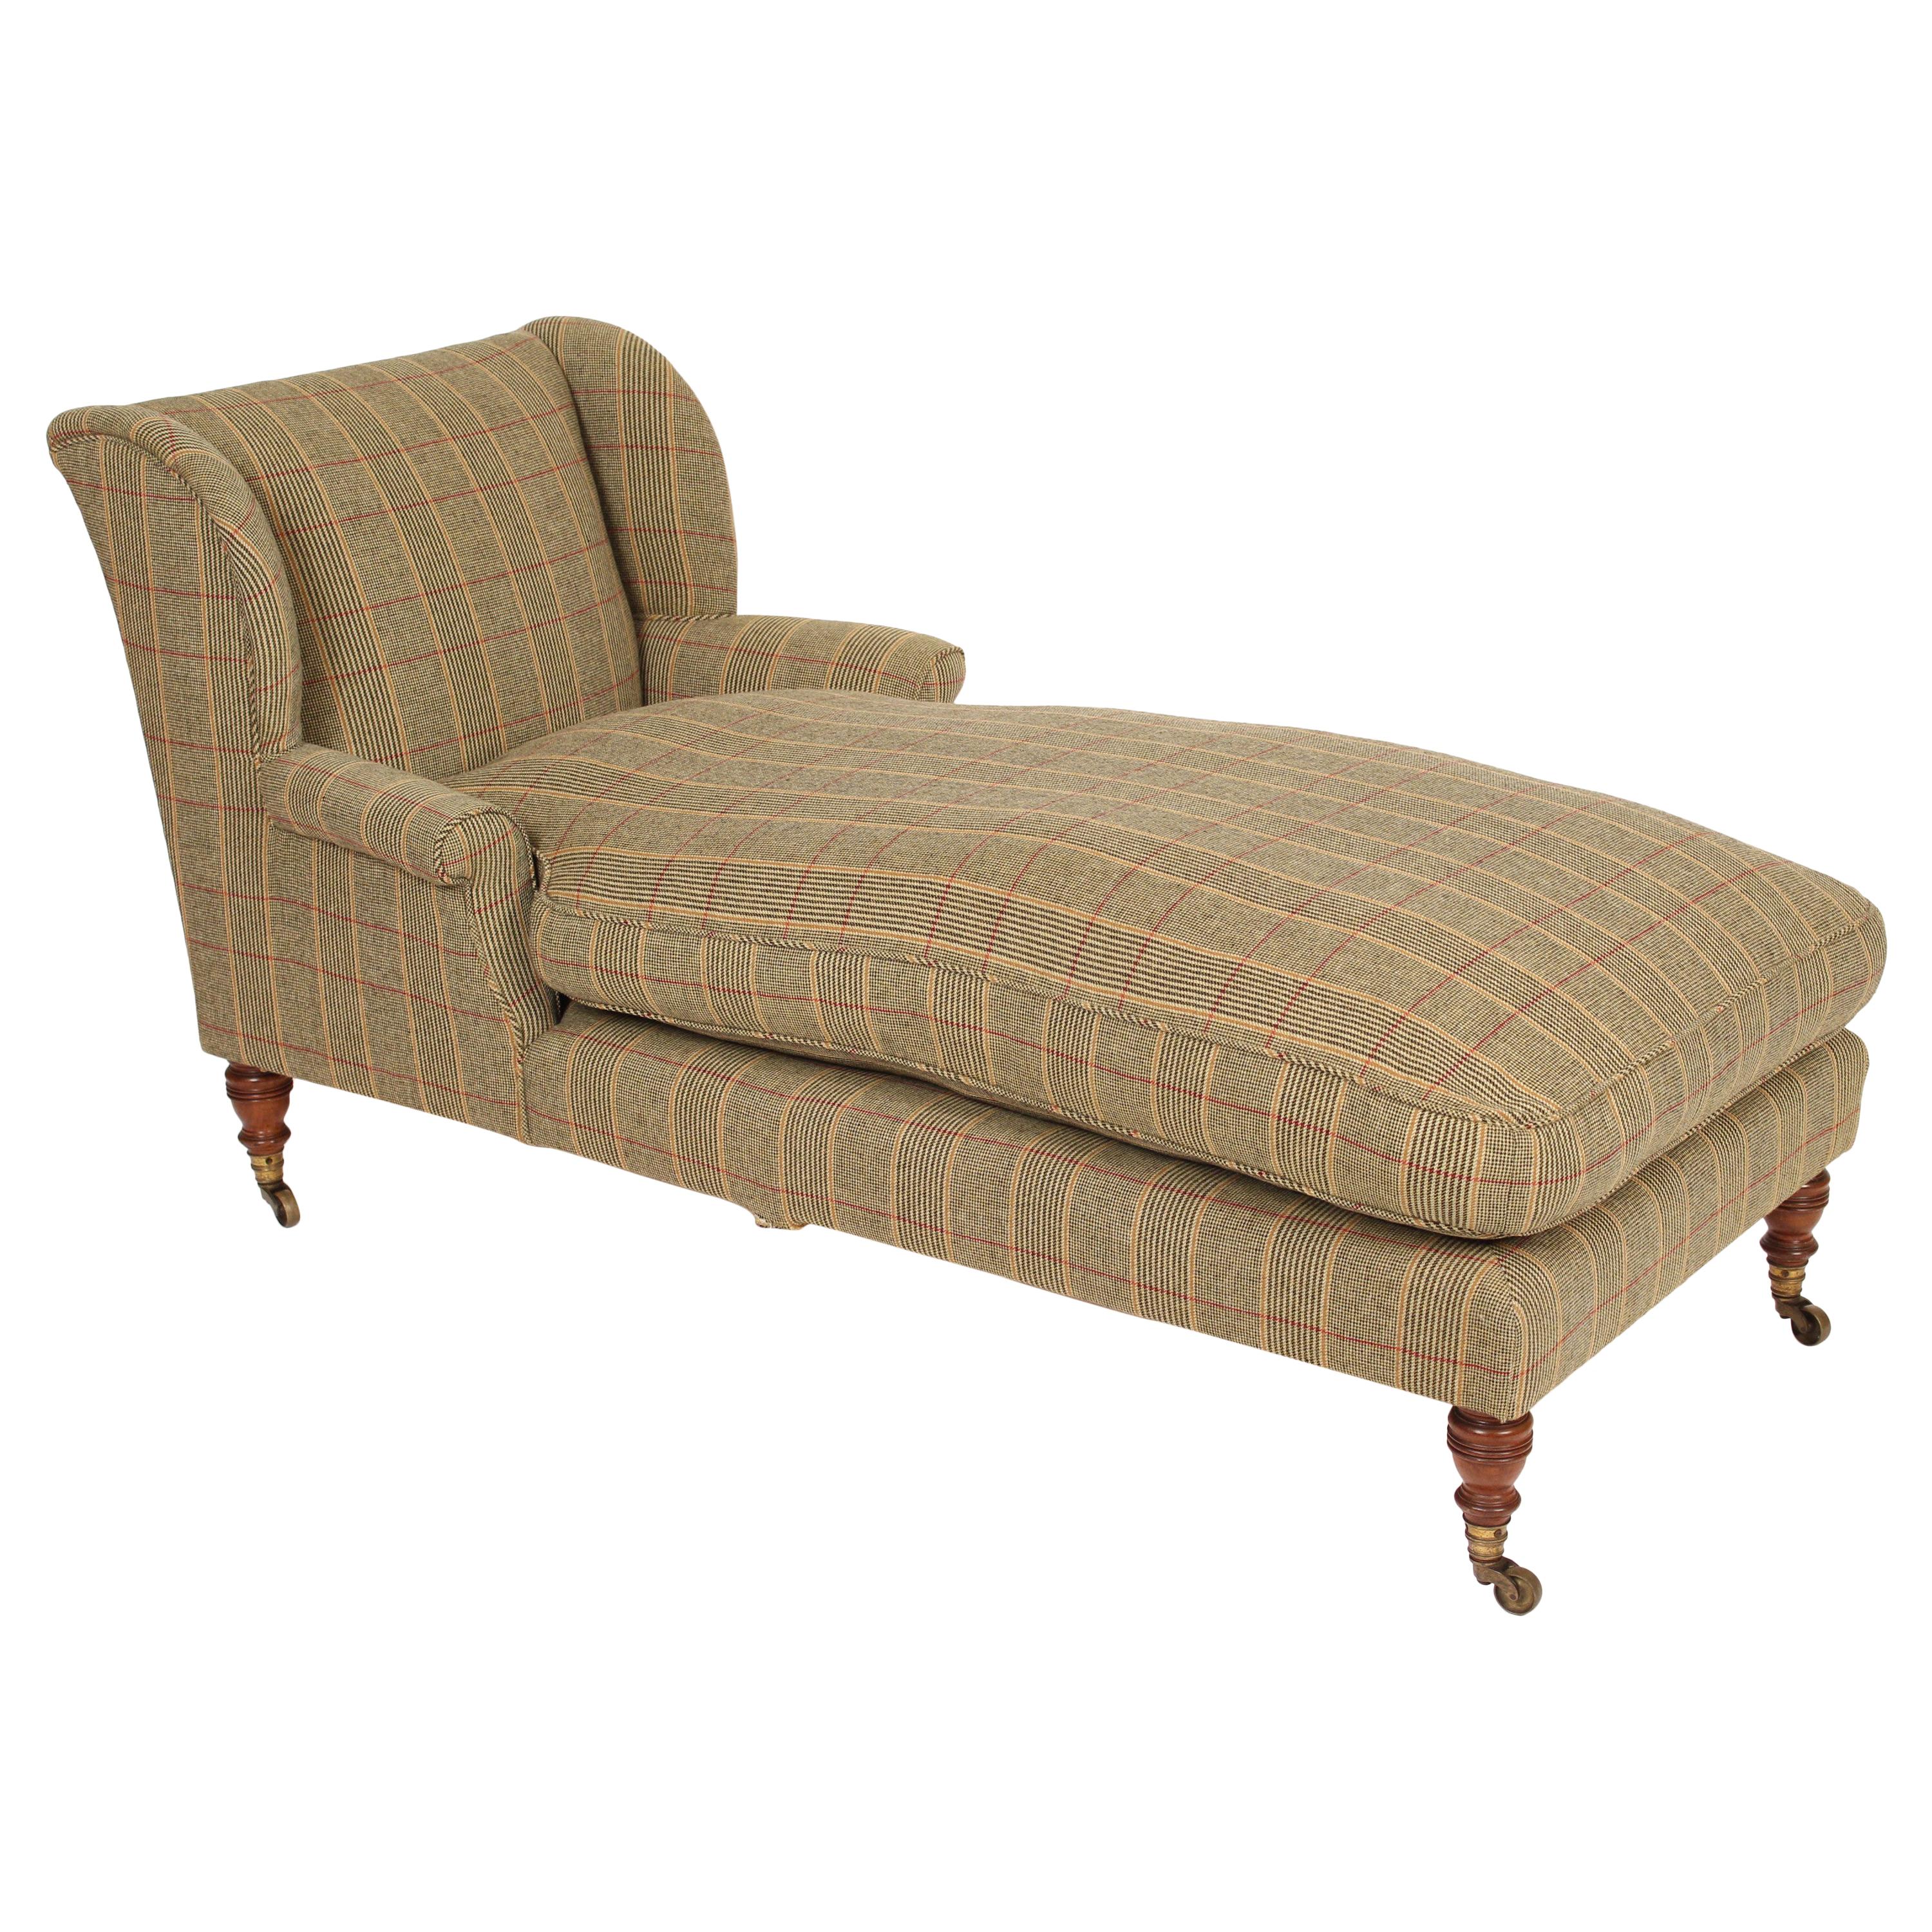 Antique William iv Style Chaise Lounge by Howard & Sons